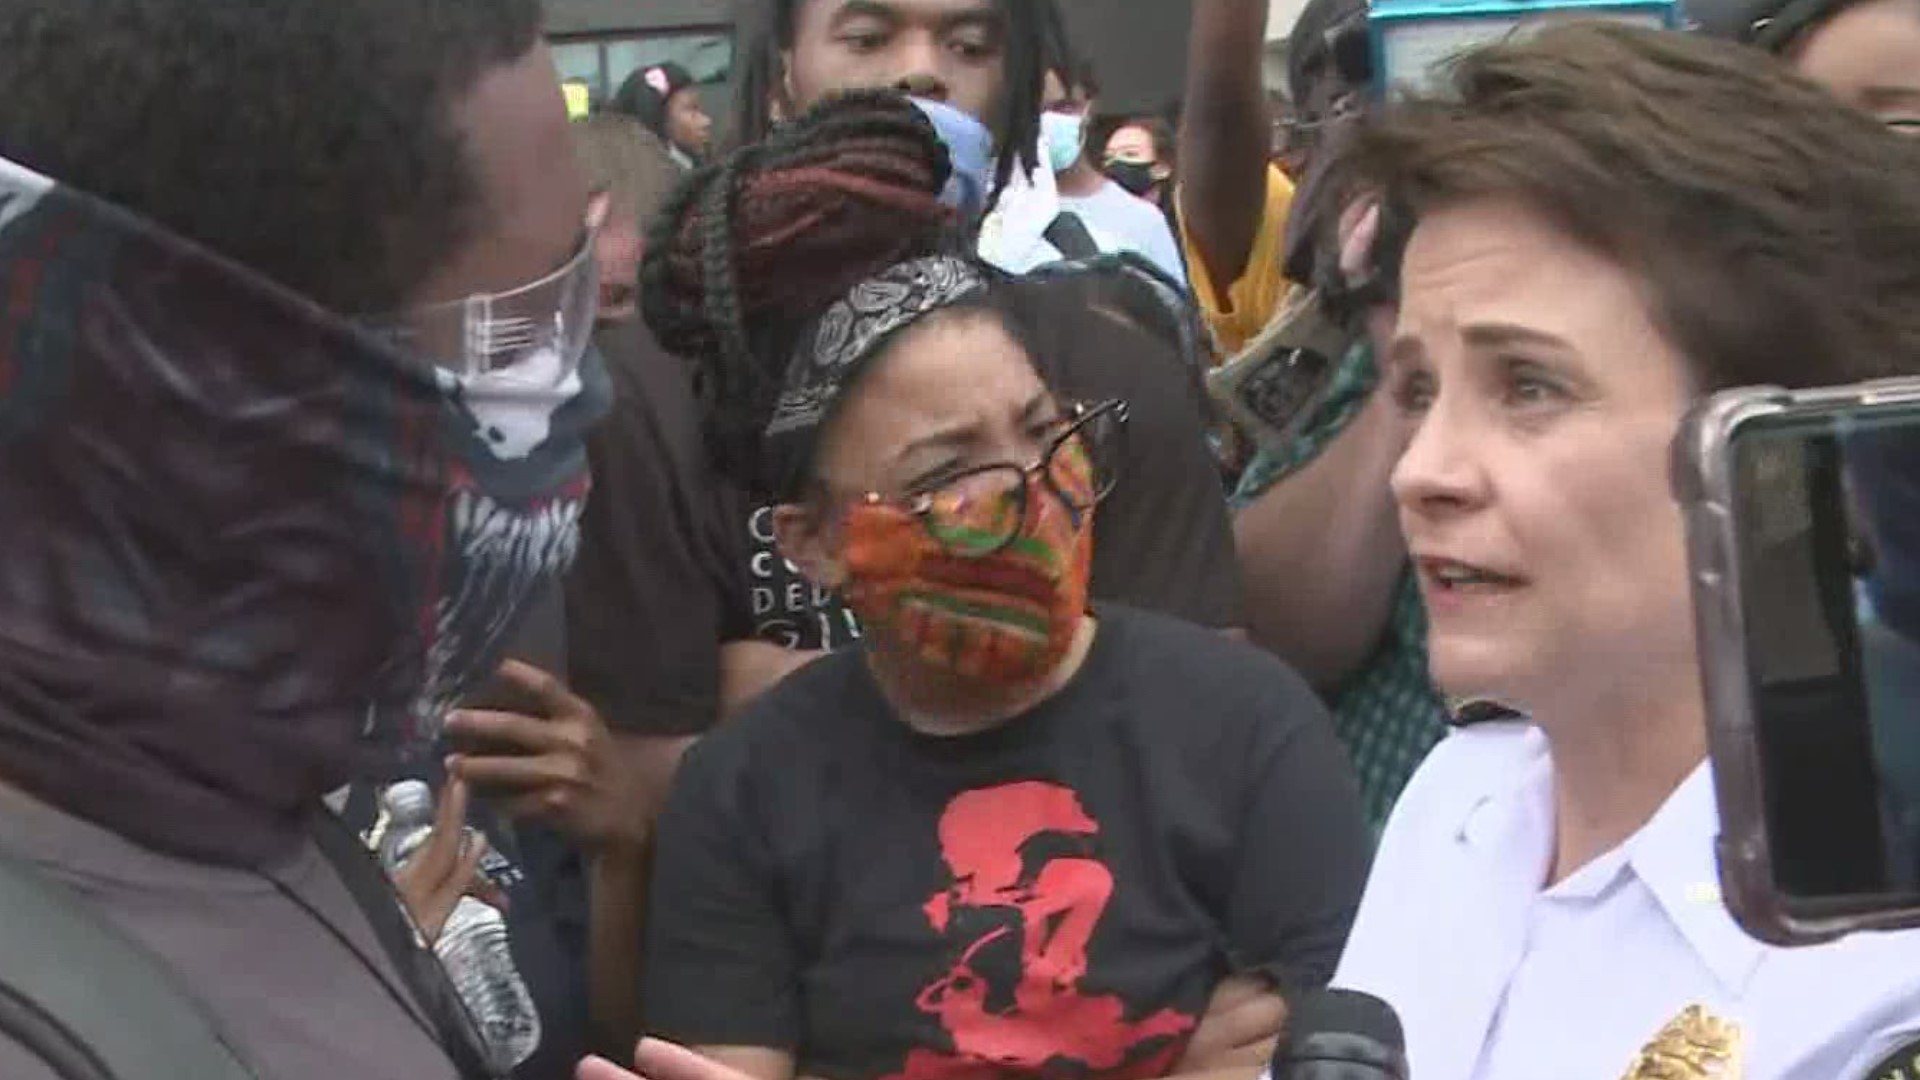 During an interview with police, she said protesters deserve to be heard.